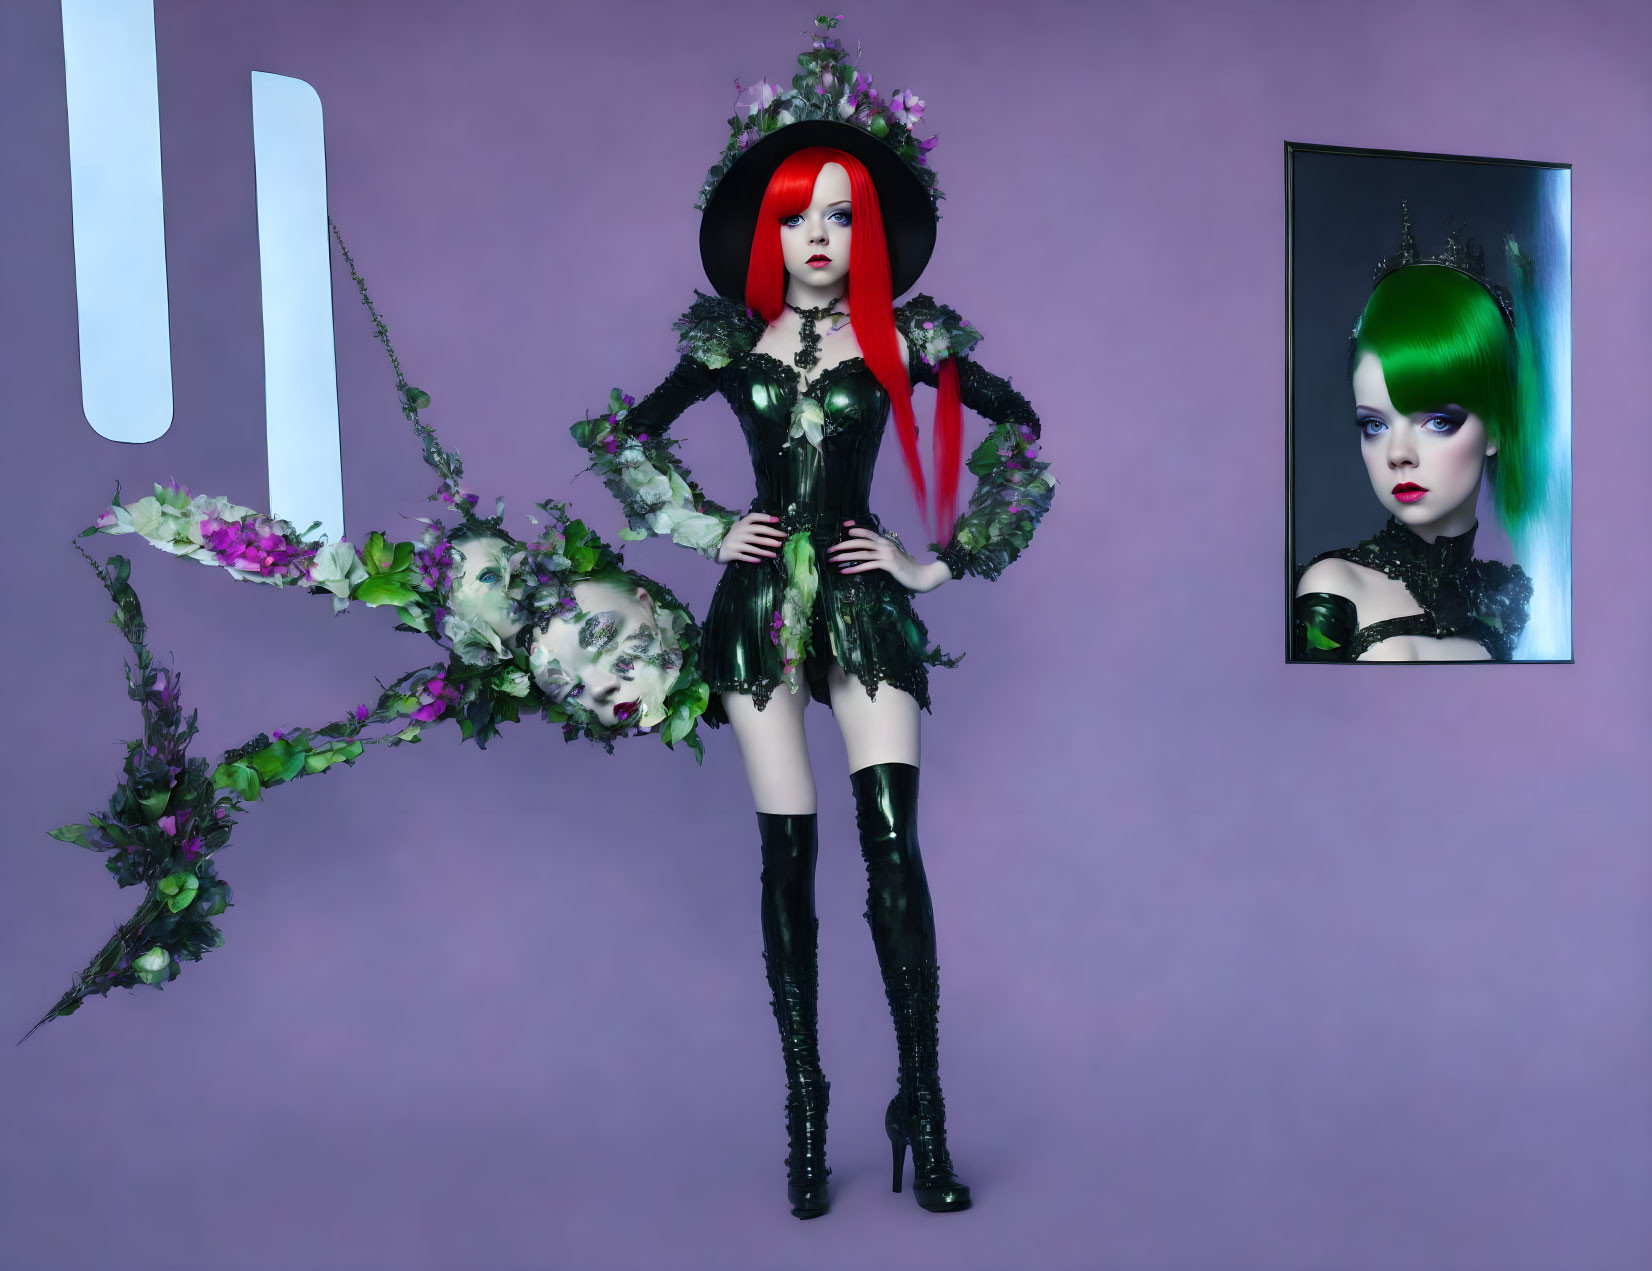 Stylized red-haired female in gothic attire with floral accessories beside green-haired portrait on purple backdrop